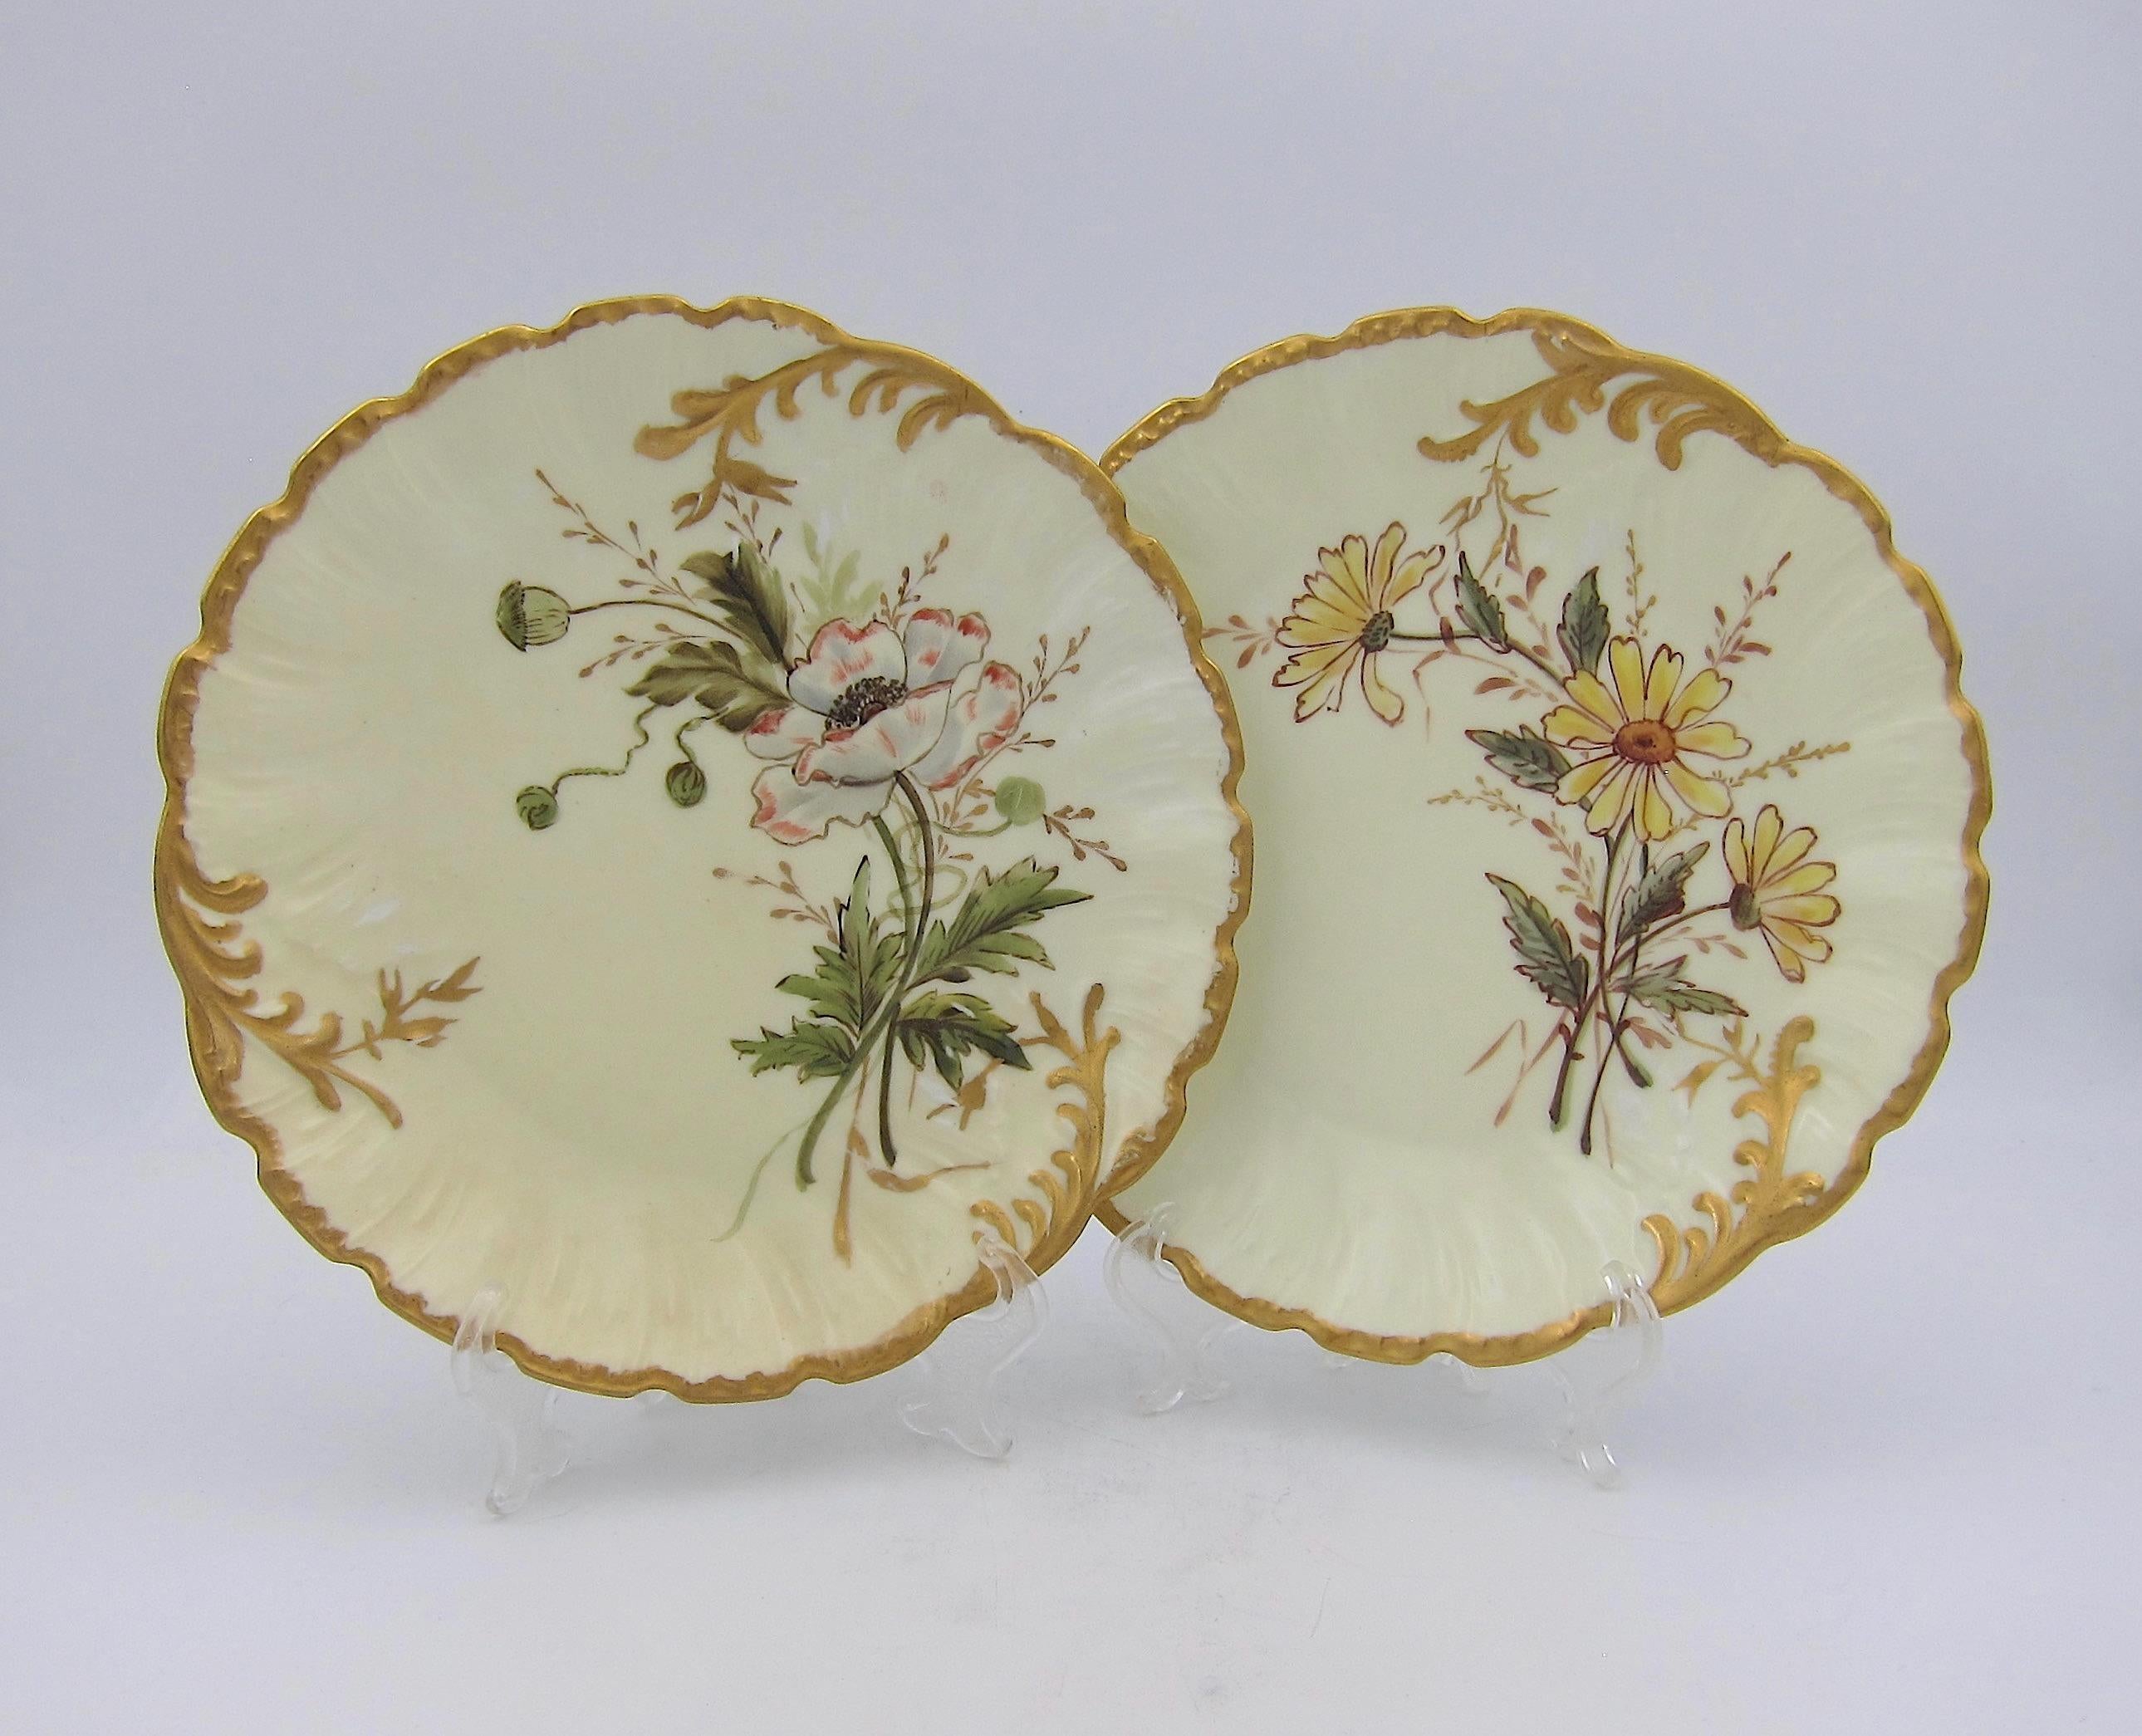 Two late 19th century porcelain plates by Martial Redon, hand-painted by Bawo & Dotter's Elite Works in Limoges, France. Each antique plate is skillfully decorated with naturalistic, hand-painted floral sprays with gilt highlights and scalloped